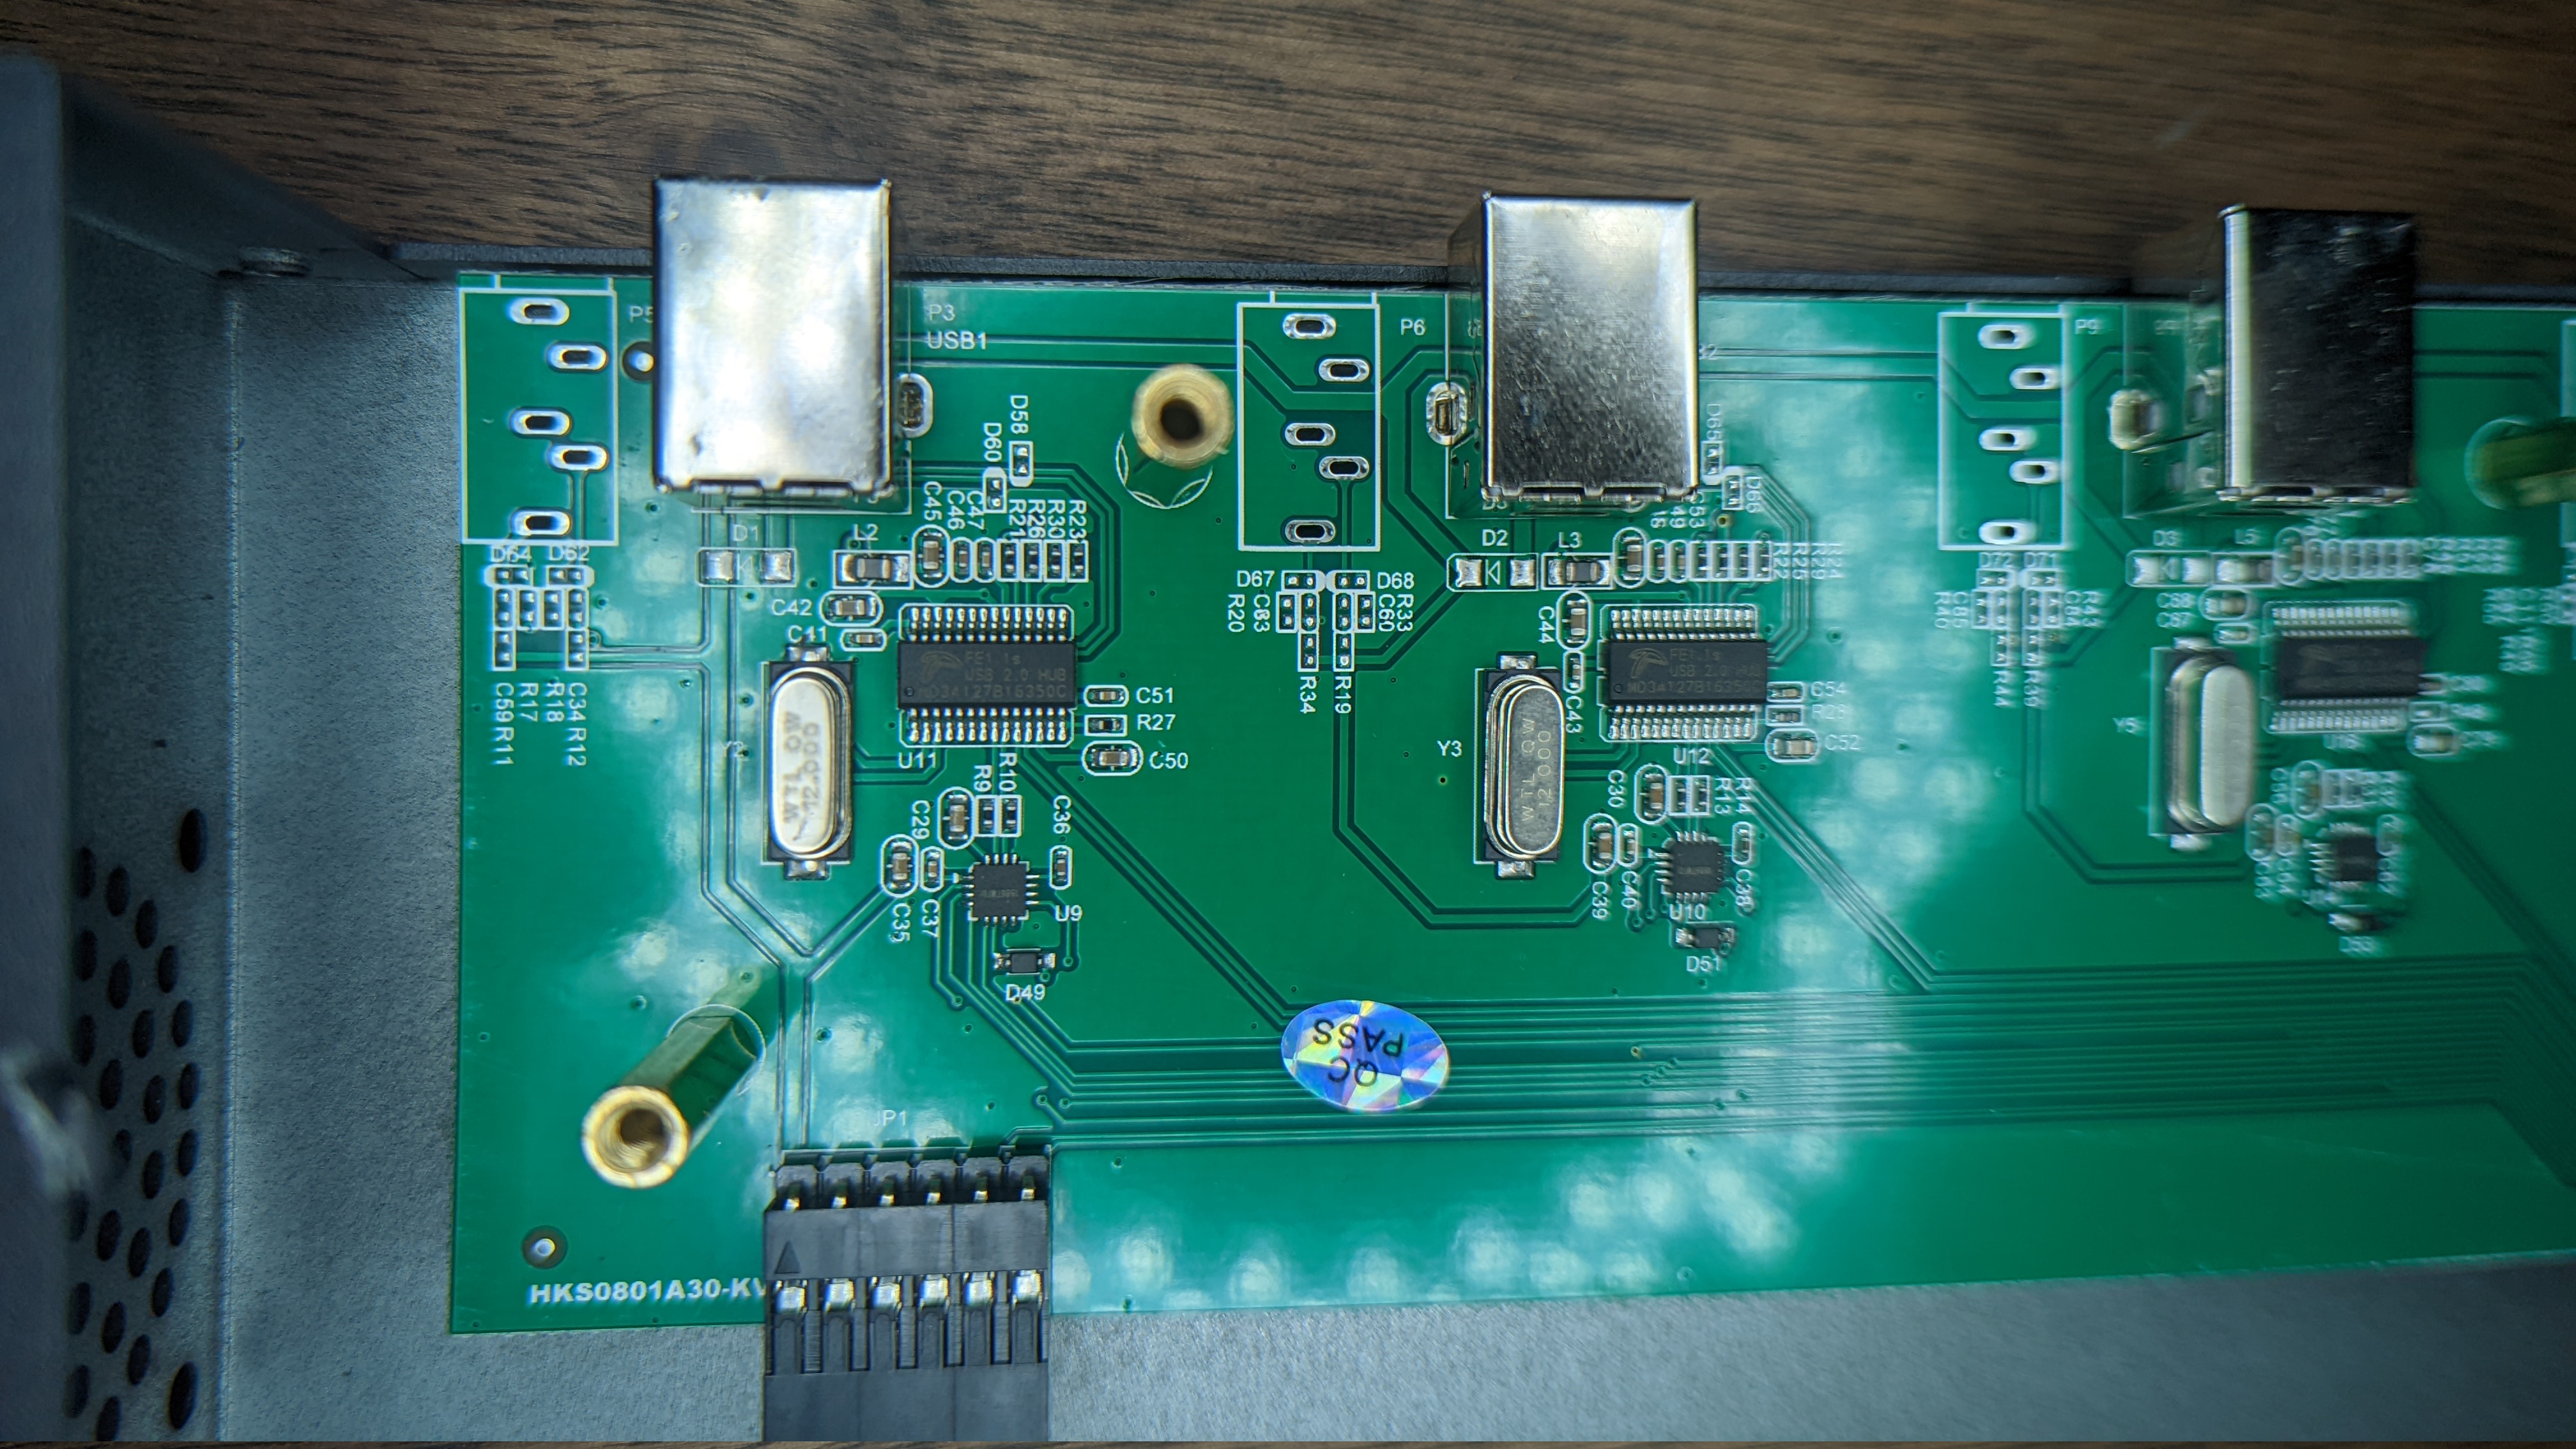 Each 'input' USB port is managed with the same IC. Note the unpopulated Headphone jack footprint on the PCB